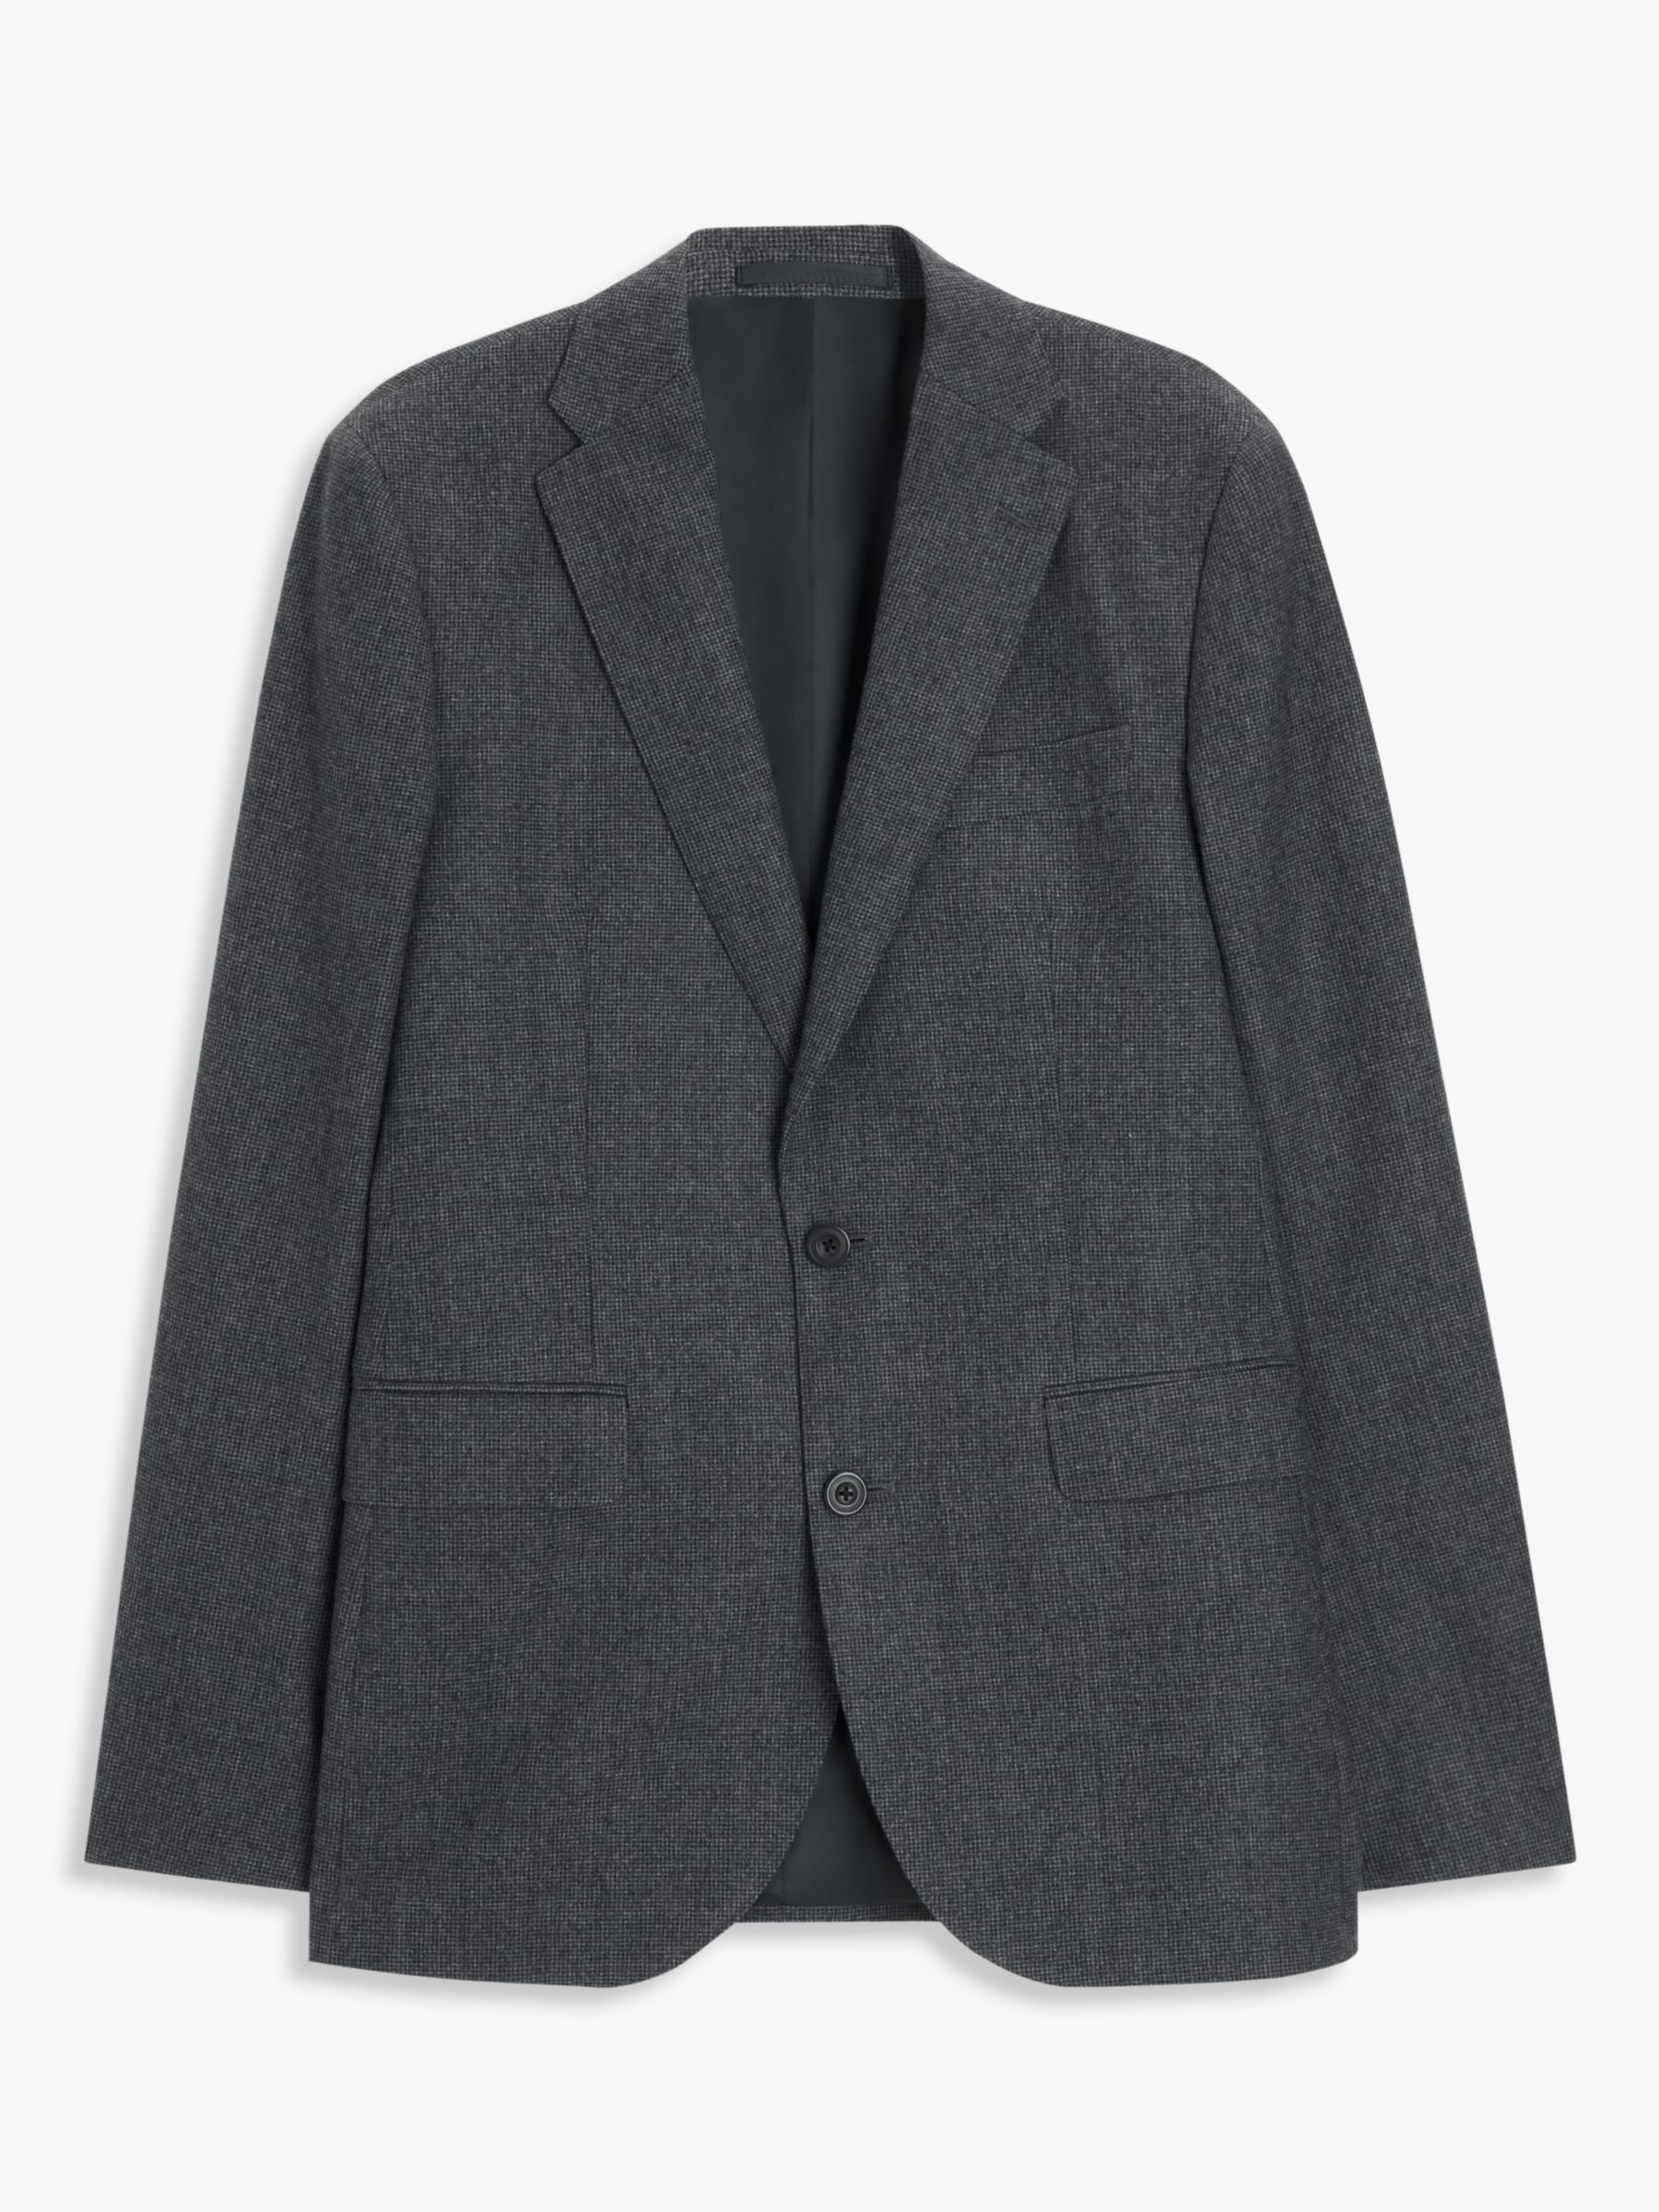 John Lewis Super 100s Wool Puppytooth Regular Fit Suit Jacket, Charcoal